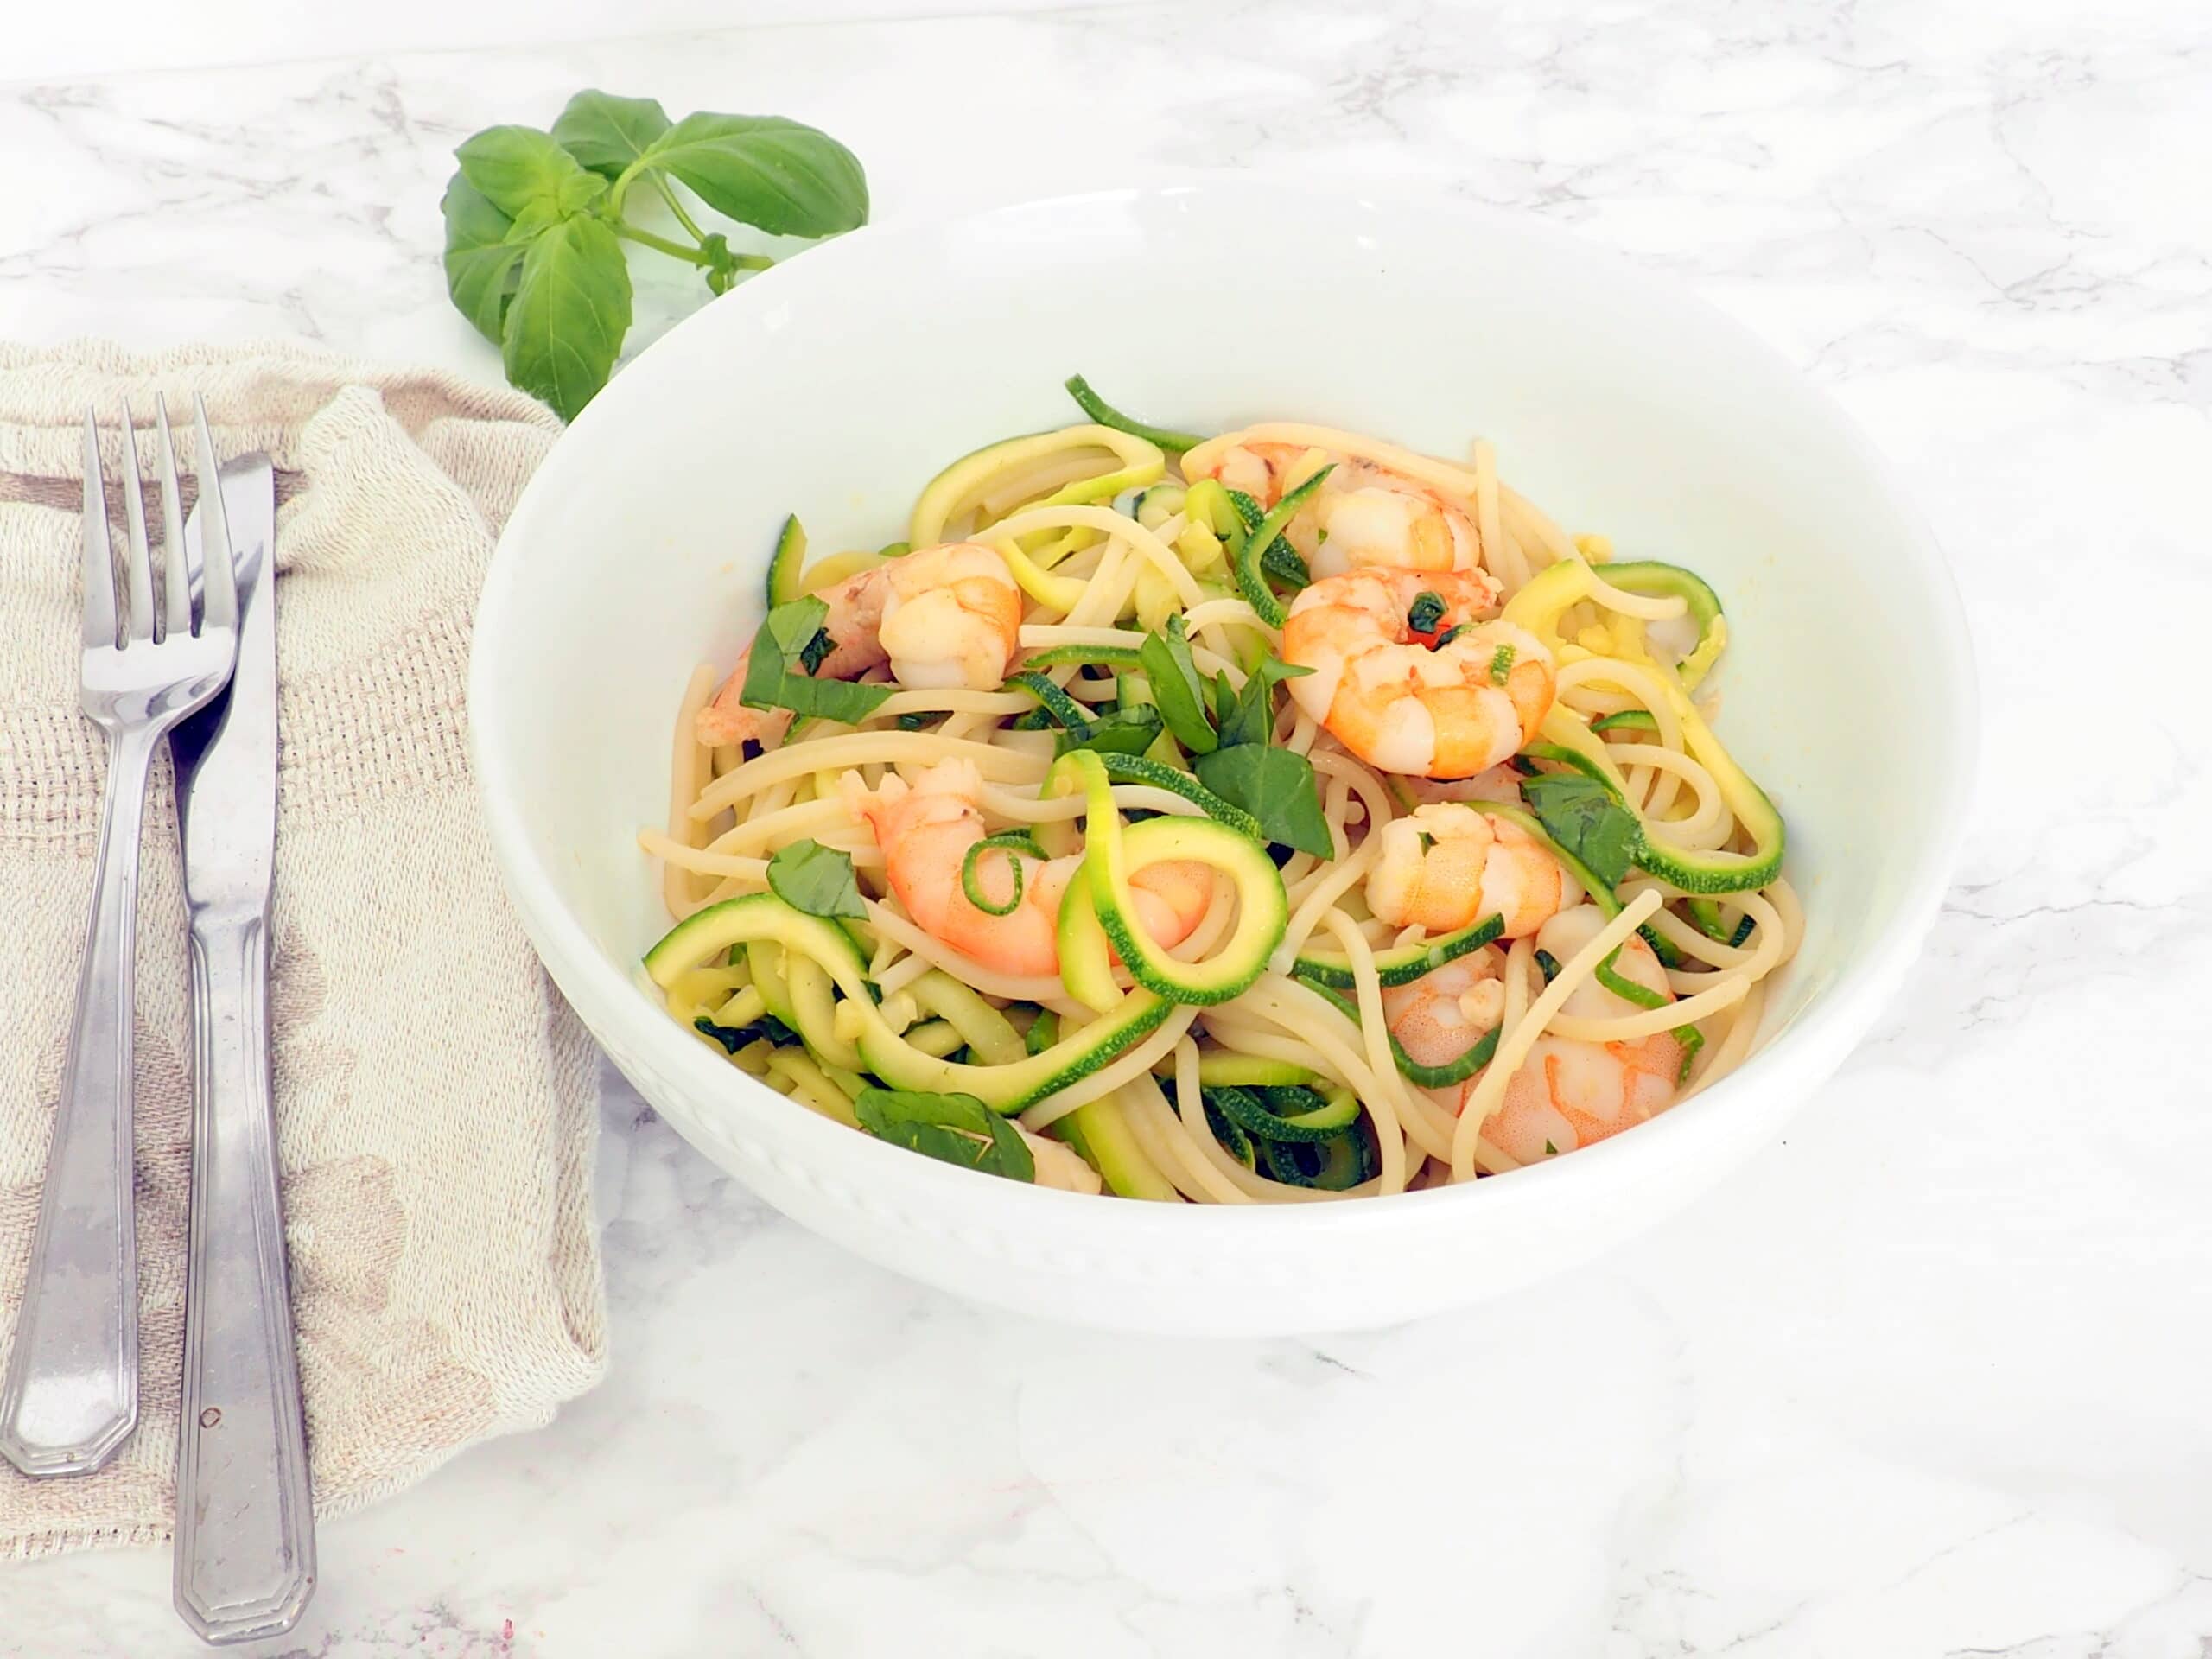 Zucchini noodle pasta is a great way to make classic pasta healthier and lighter. Make it family friendly with my mix-in ideas and, of course, serving it up several times before you give up!